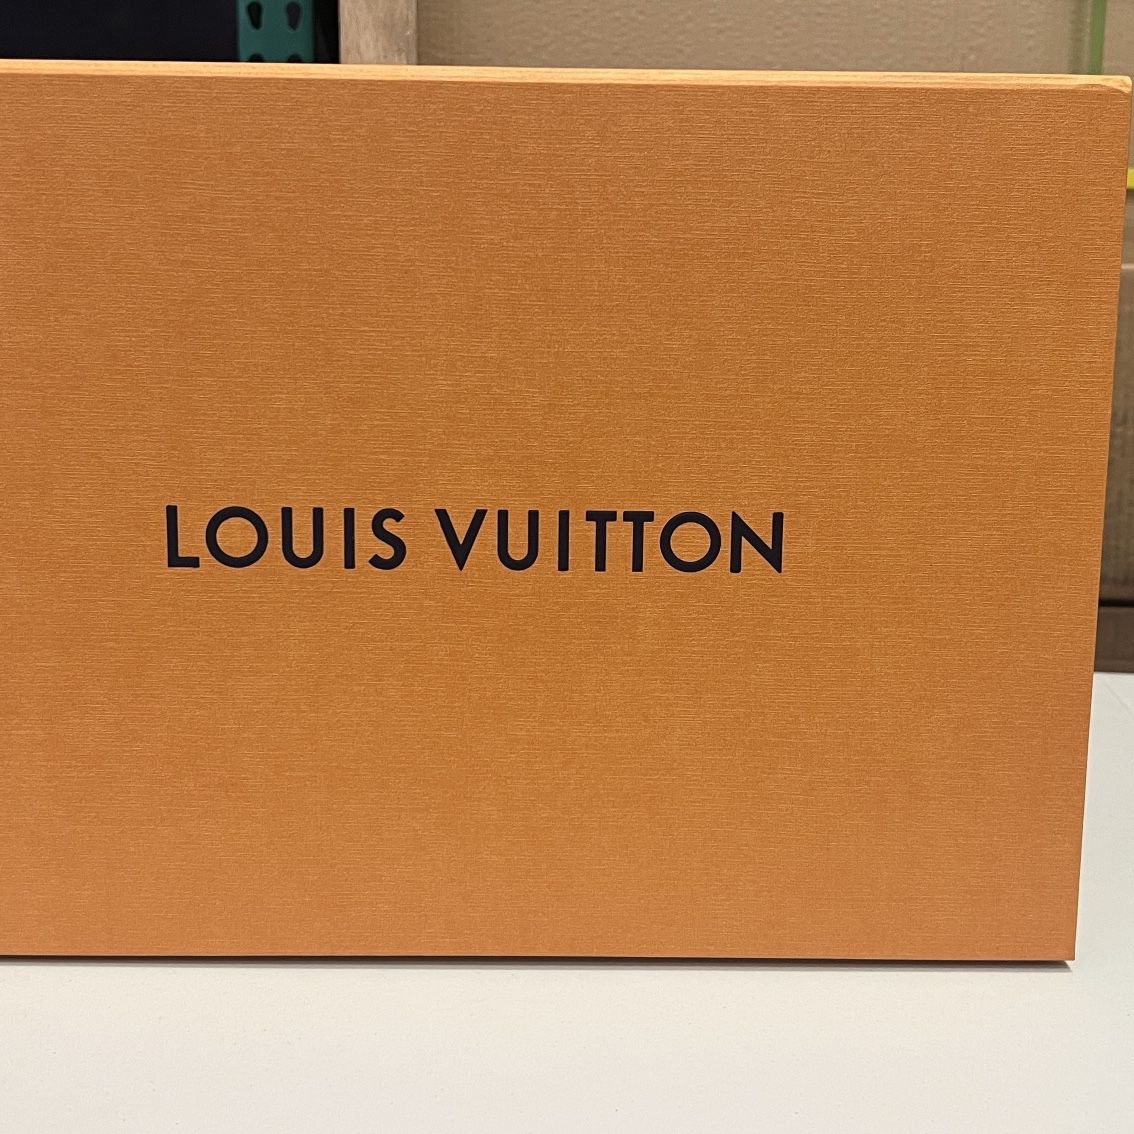 Authentic LOUIS VUITTON LV Real Box 16x 11.5 for Sale in Medley